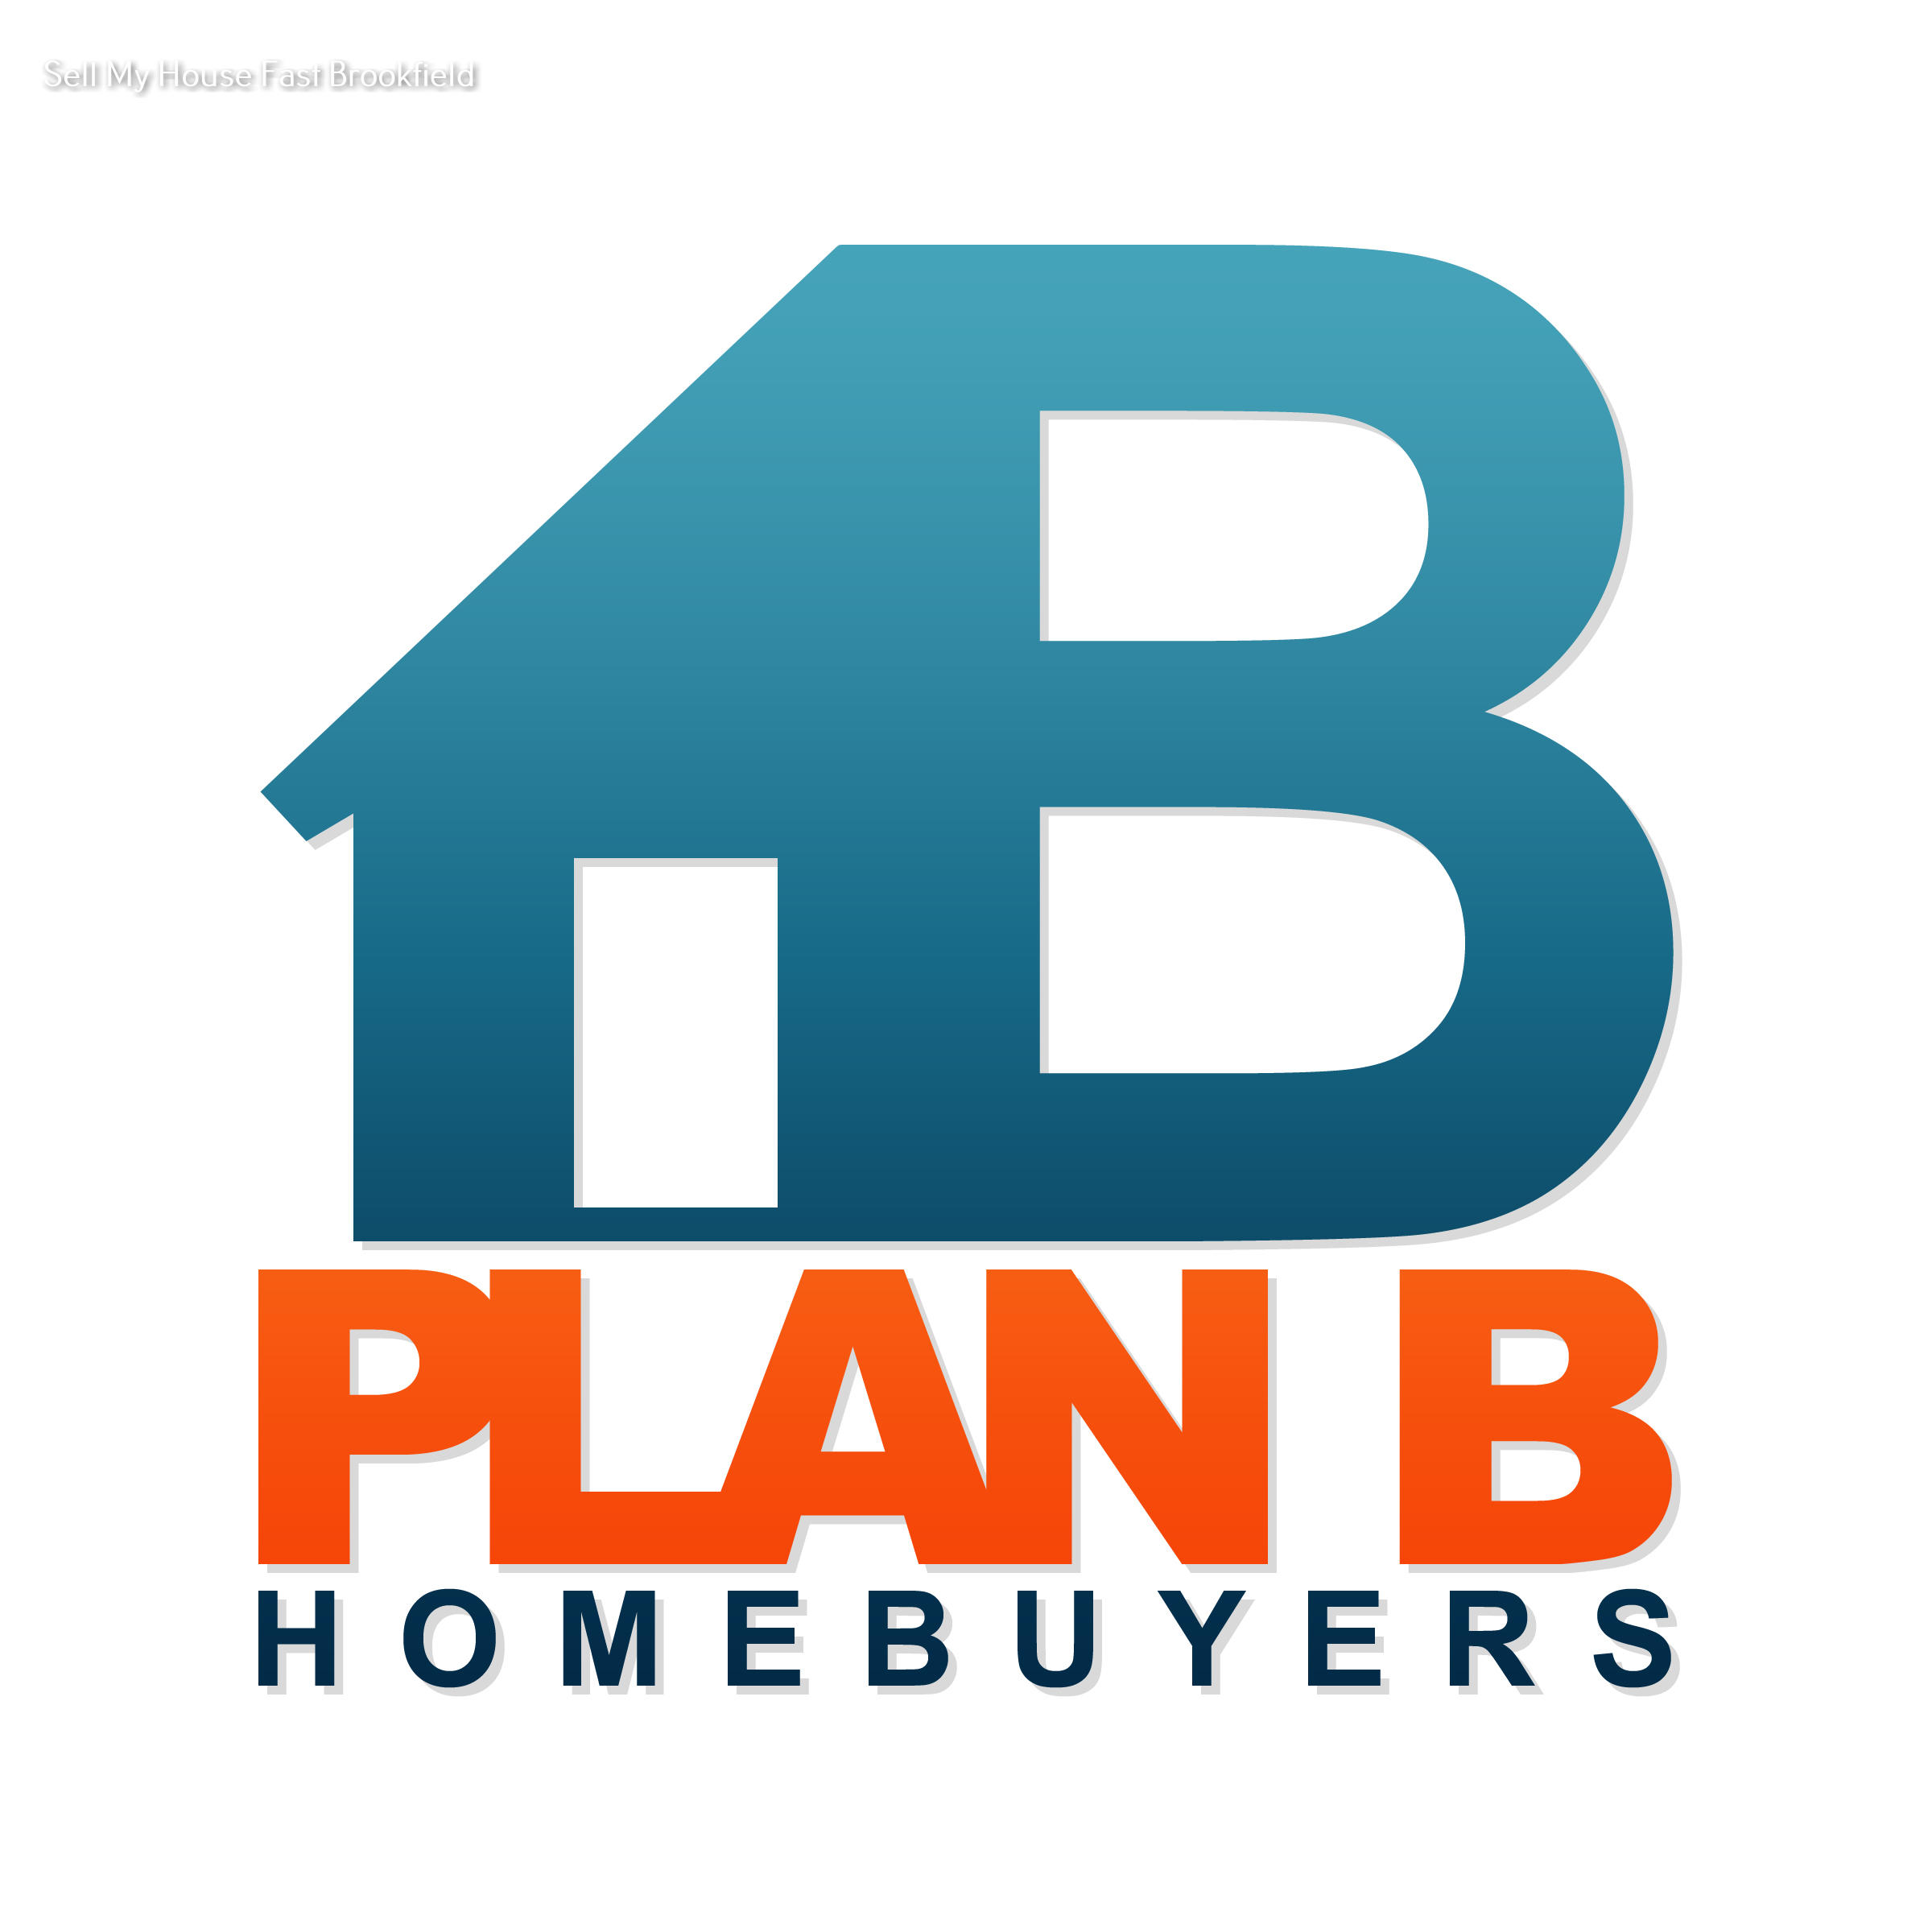 Plan B HomeBuyers Offers Quick Solutions for Milwaukee Home Sellers